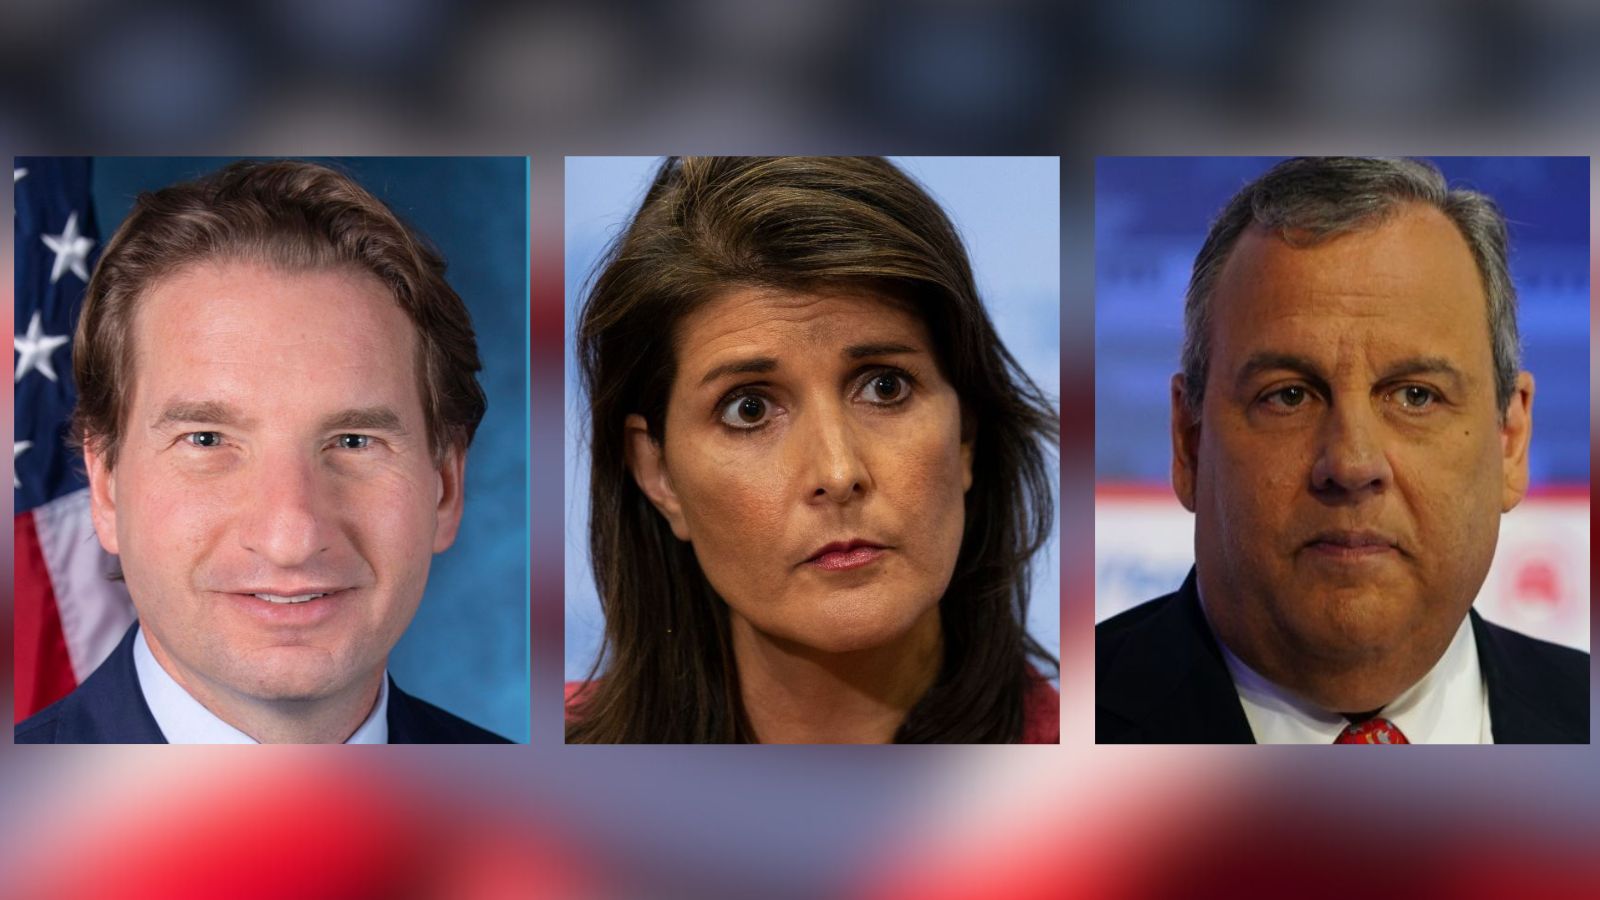 “Neocon Warmonger Puppets” – New Hampshire Voters Hit Out at Christie and Haley as Election Tensions Rise